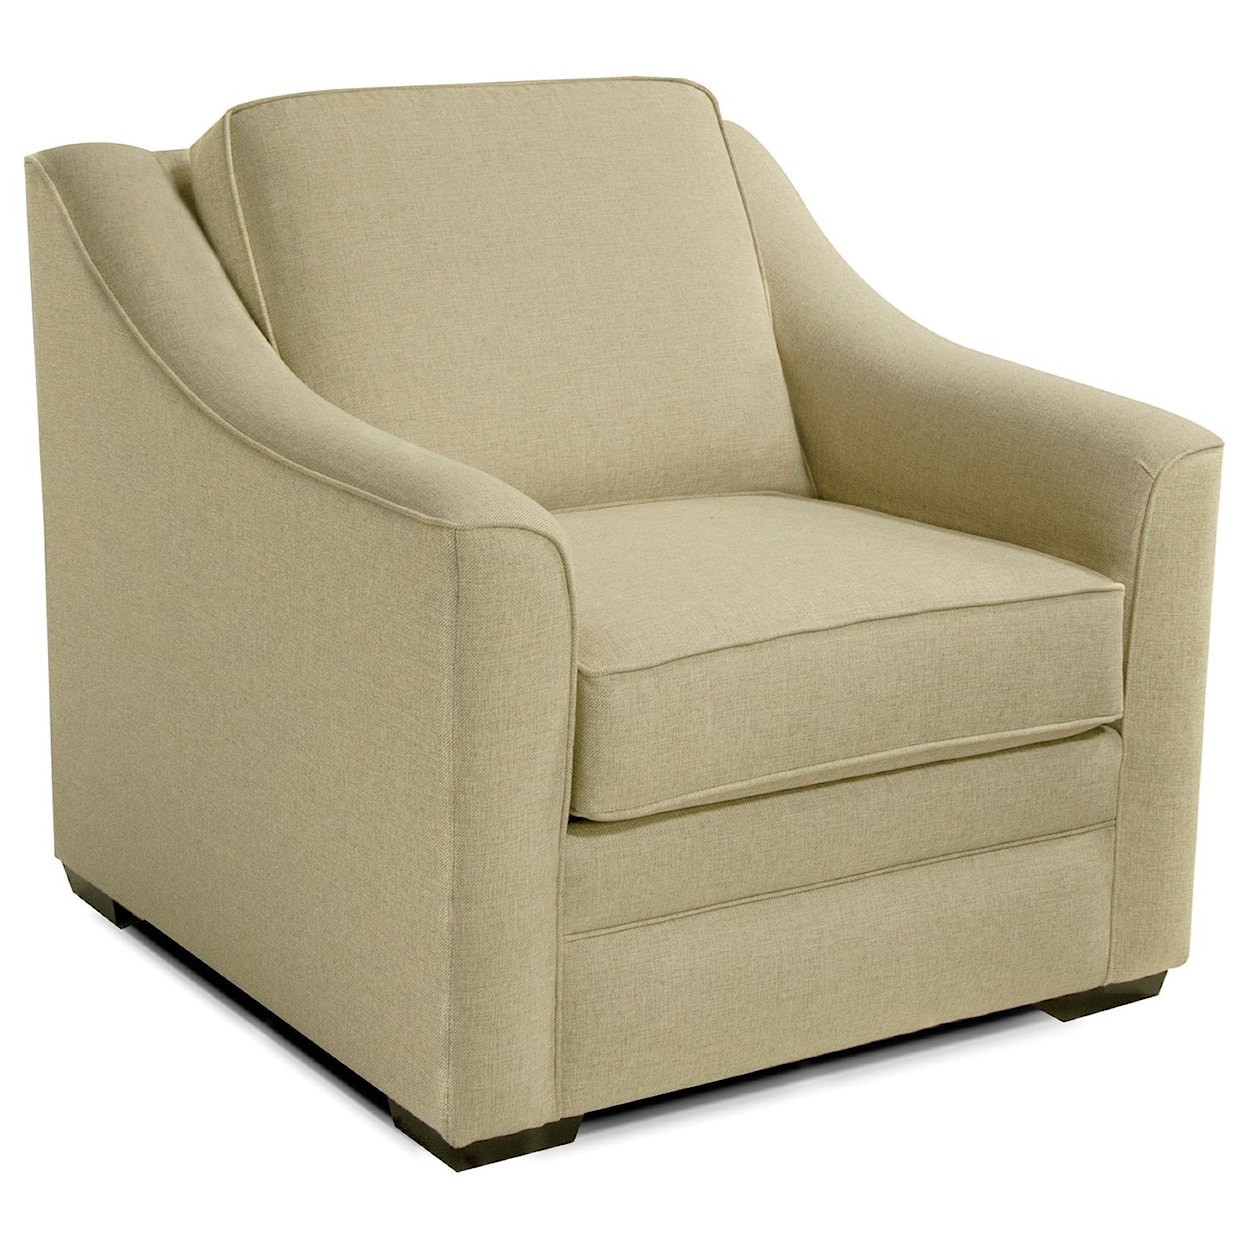 Tennessee Custom Upholstery 4T00 Series Chair